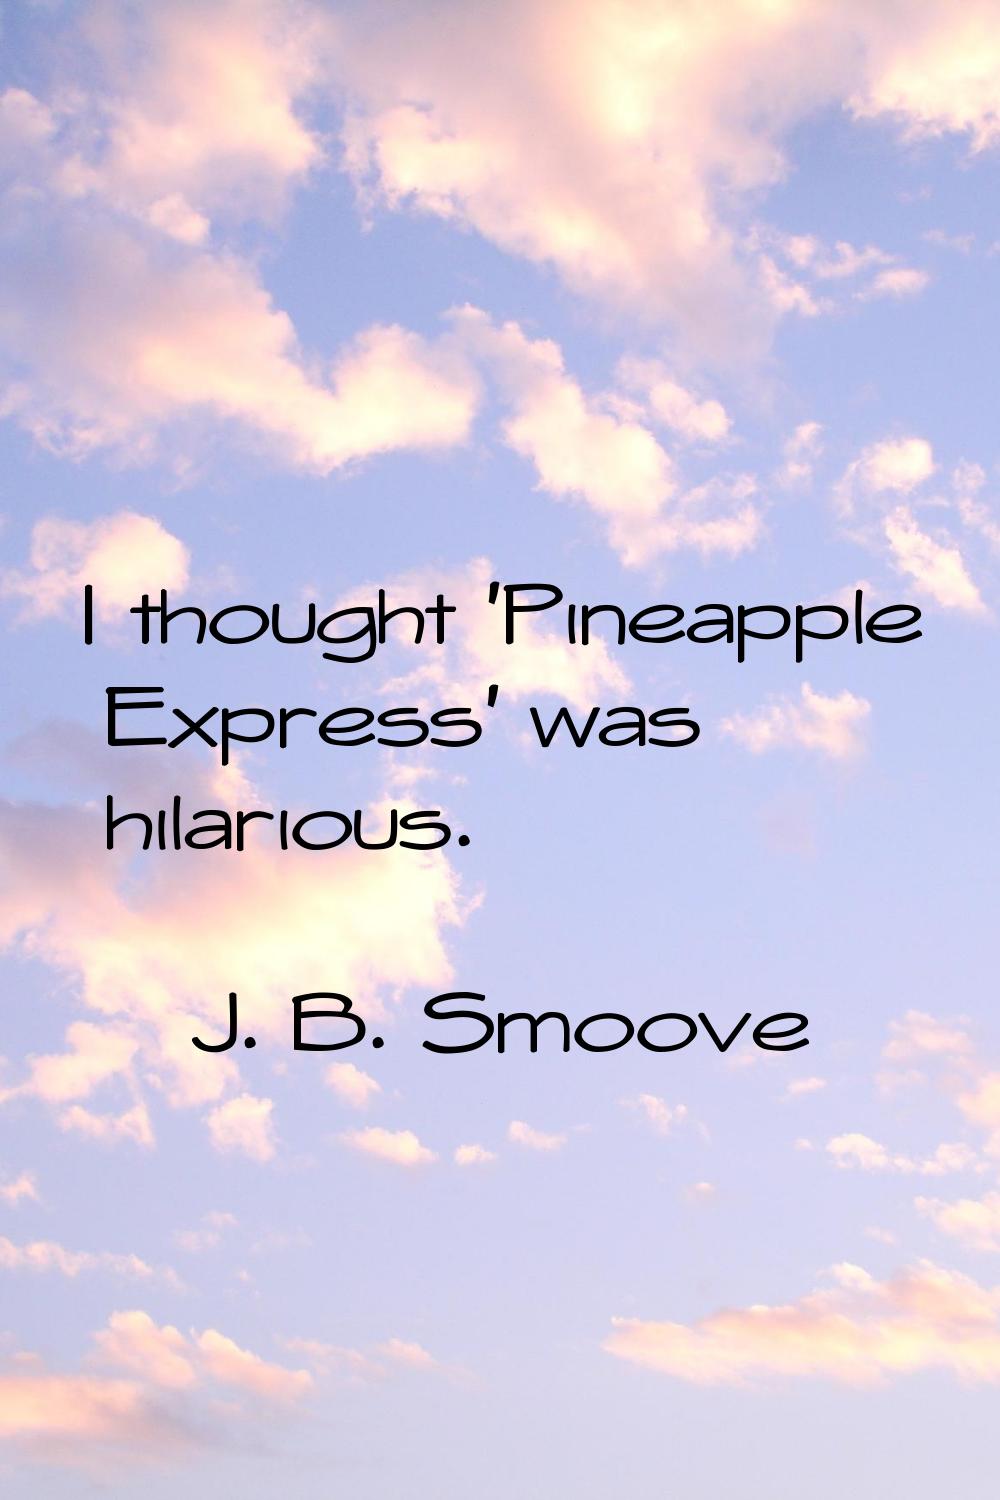 I thought 'Pineapple Express' was hilarious.